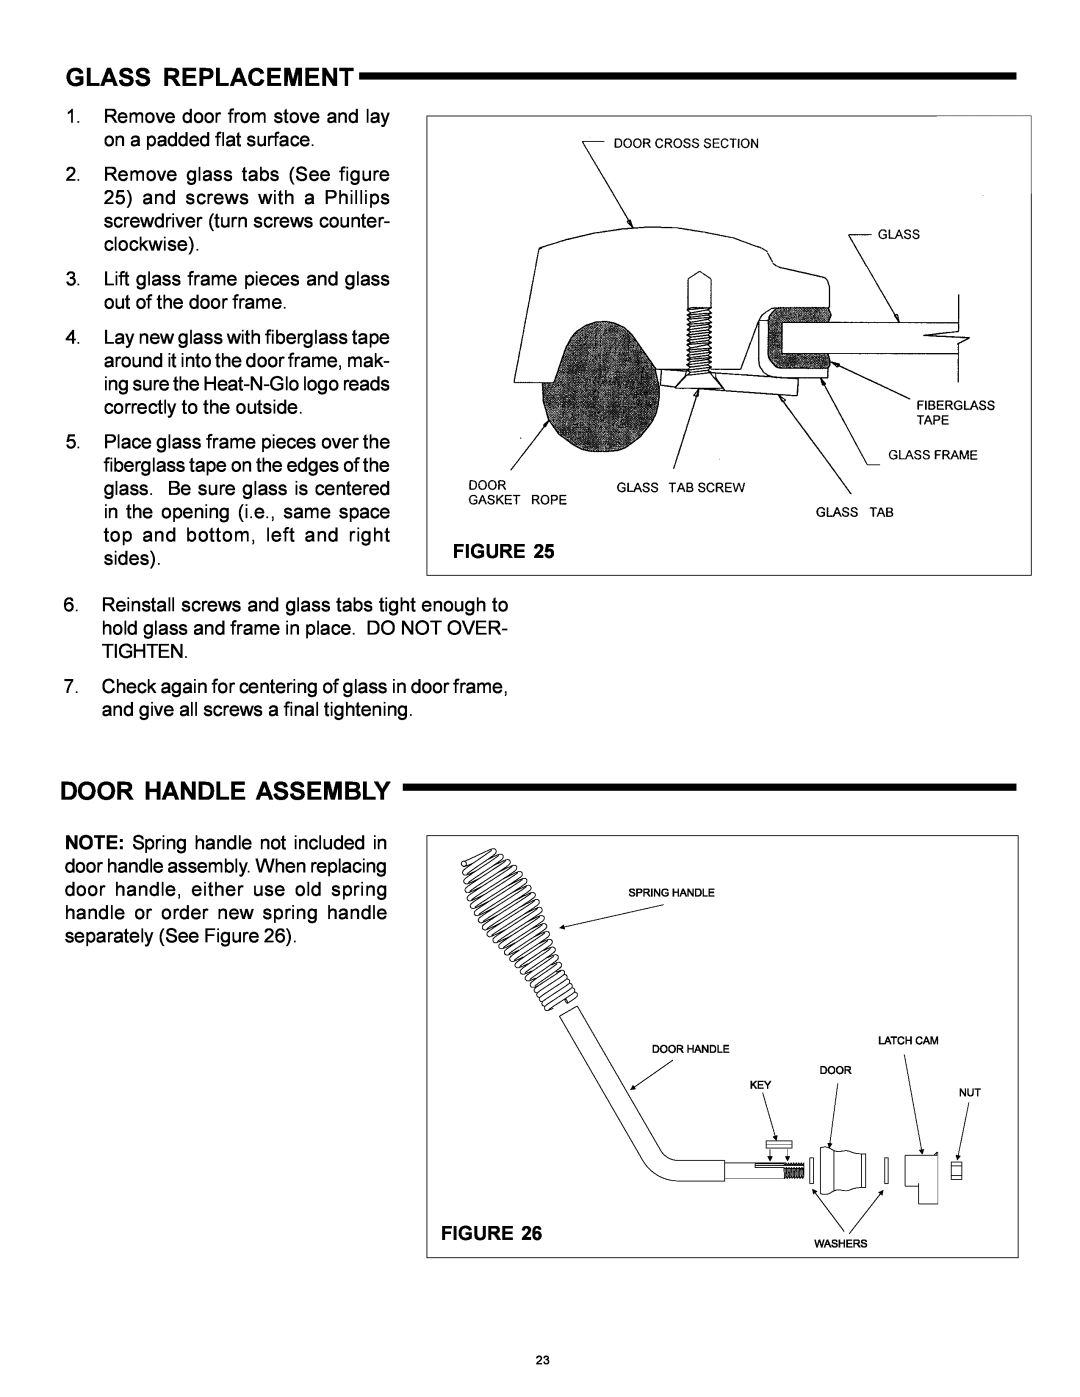 Heat & Glo LifeStyle WS-250, WS-150 installation instructions Glass Replacement, Door Handle Assembly 